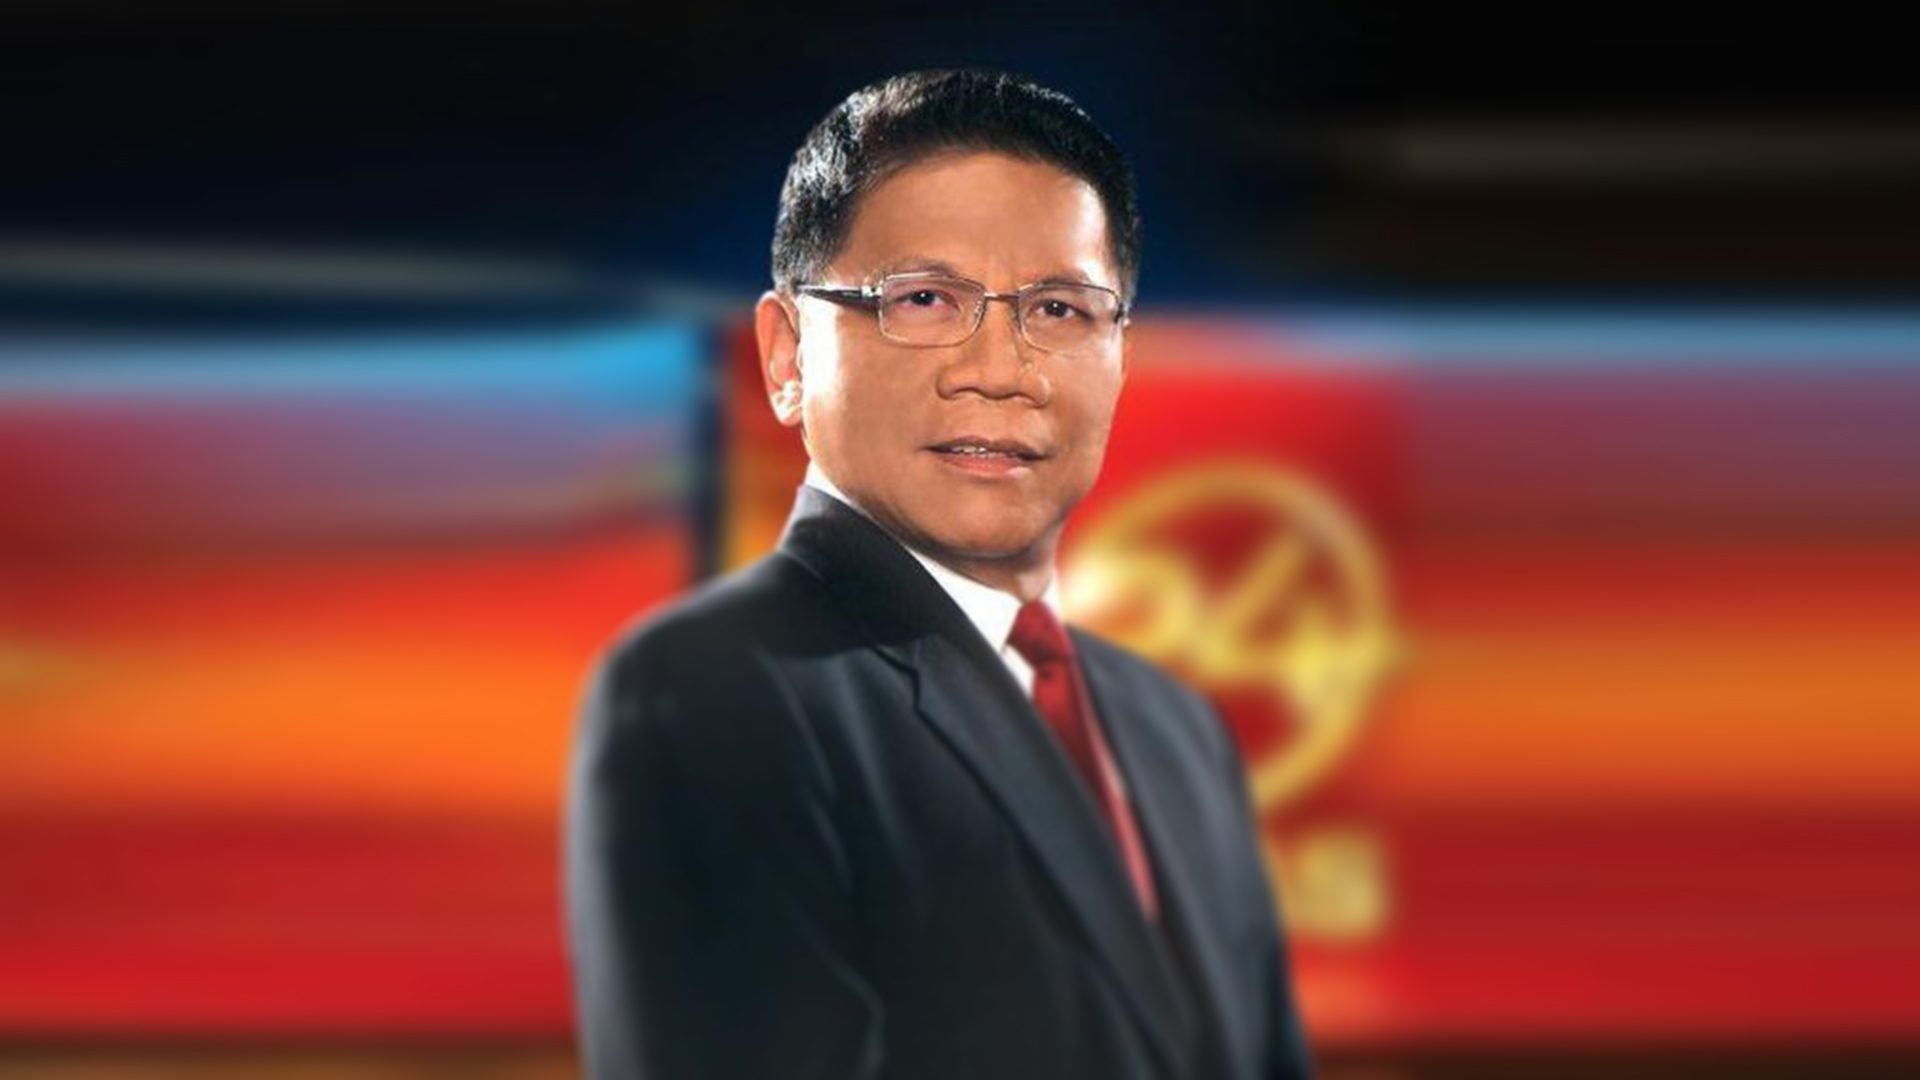 Off cam, Mike Enriquez was wise mentor who taught lessons beyond journalism